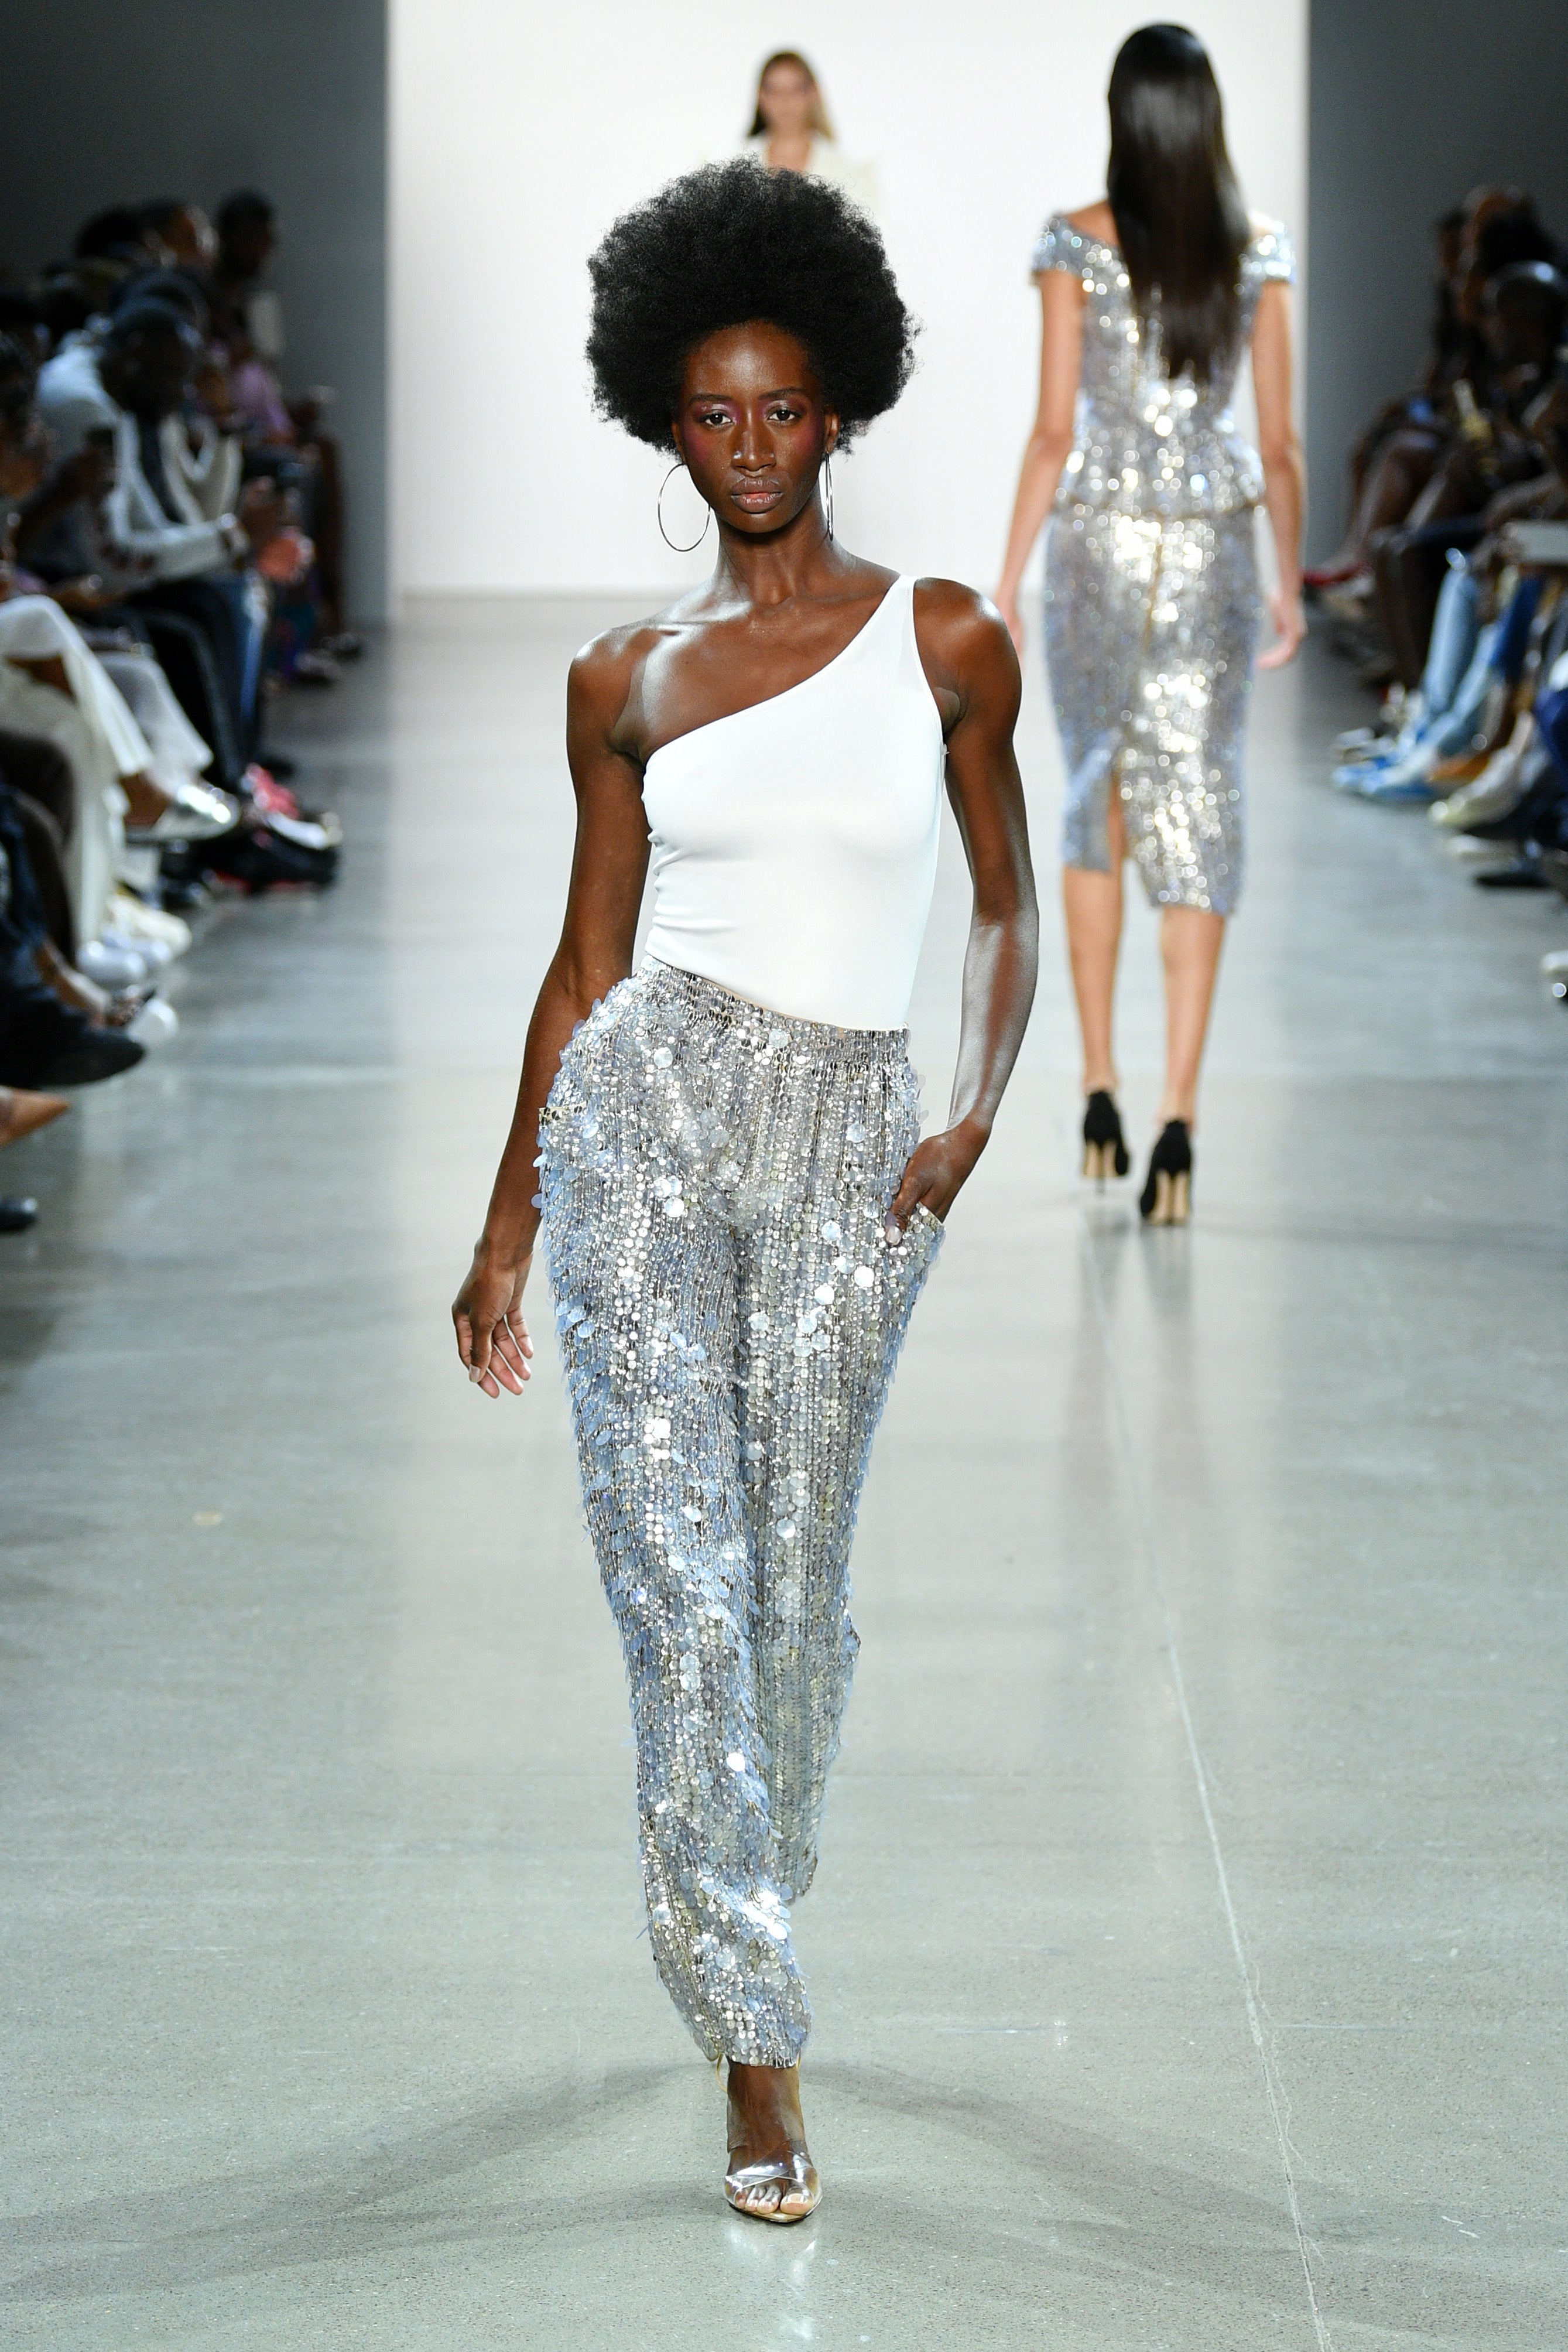 NYFW: Aliette's Spring/Summer 2020 Collection Paid Homage To Black Women